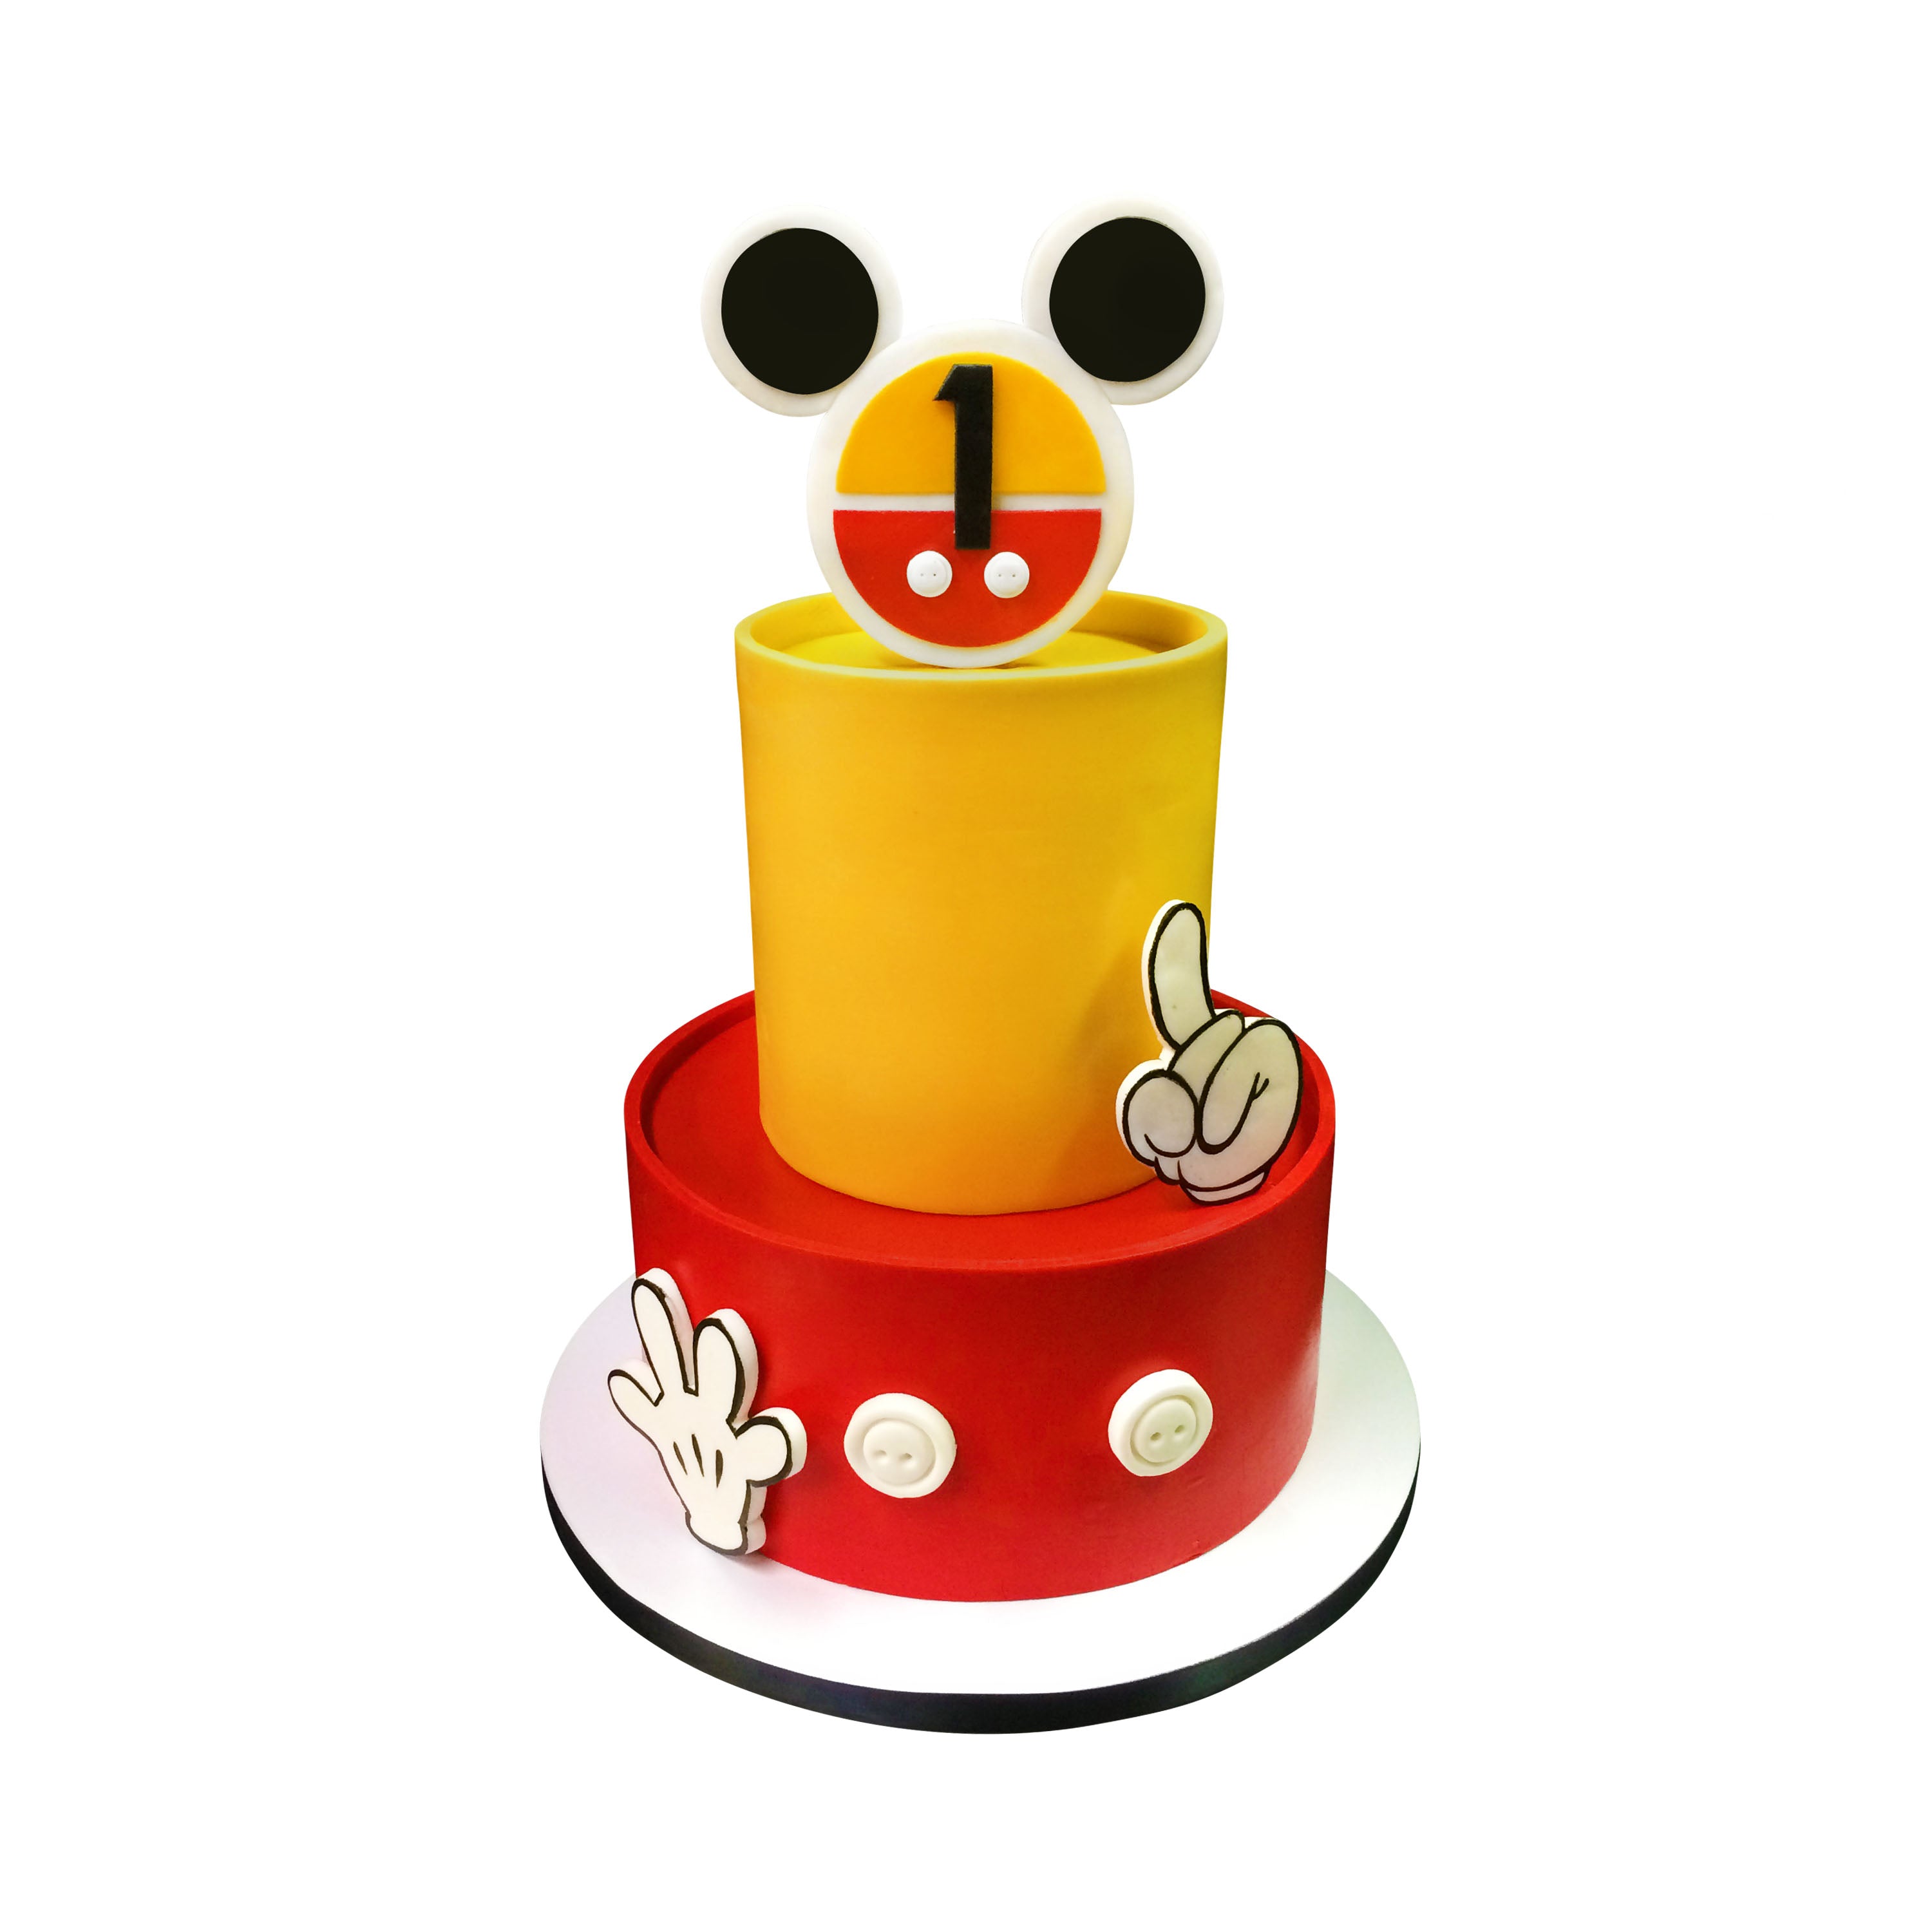 A cute & simple Mickey Mouse cake - Wilma's Cake Creations | Facebook